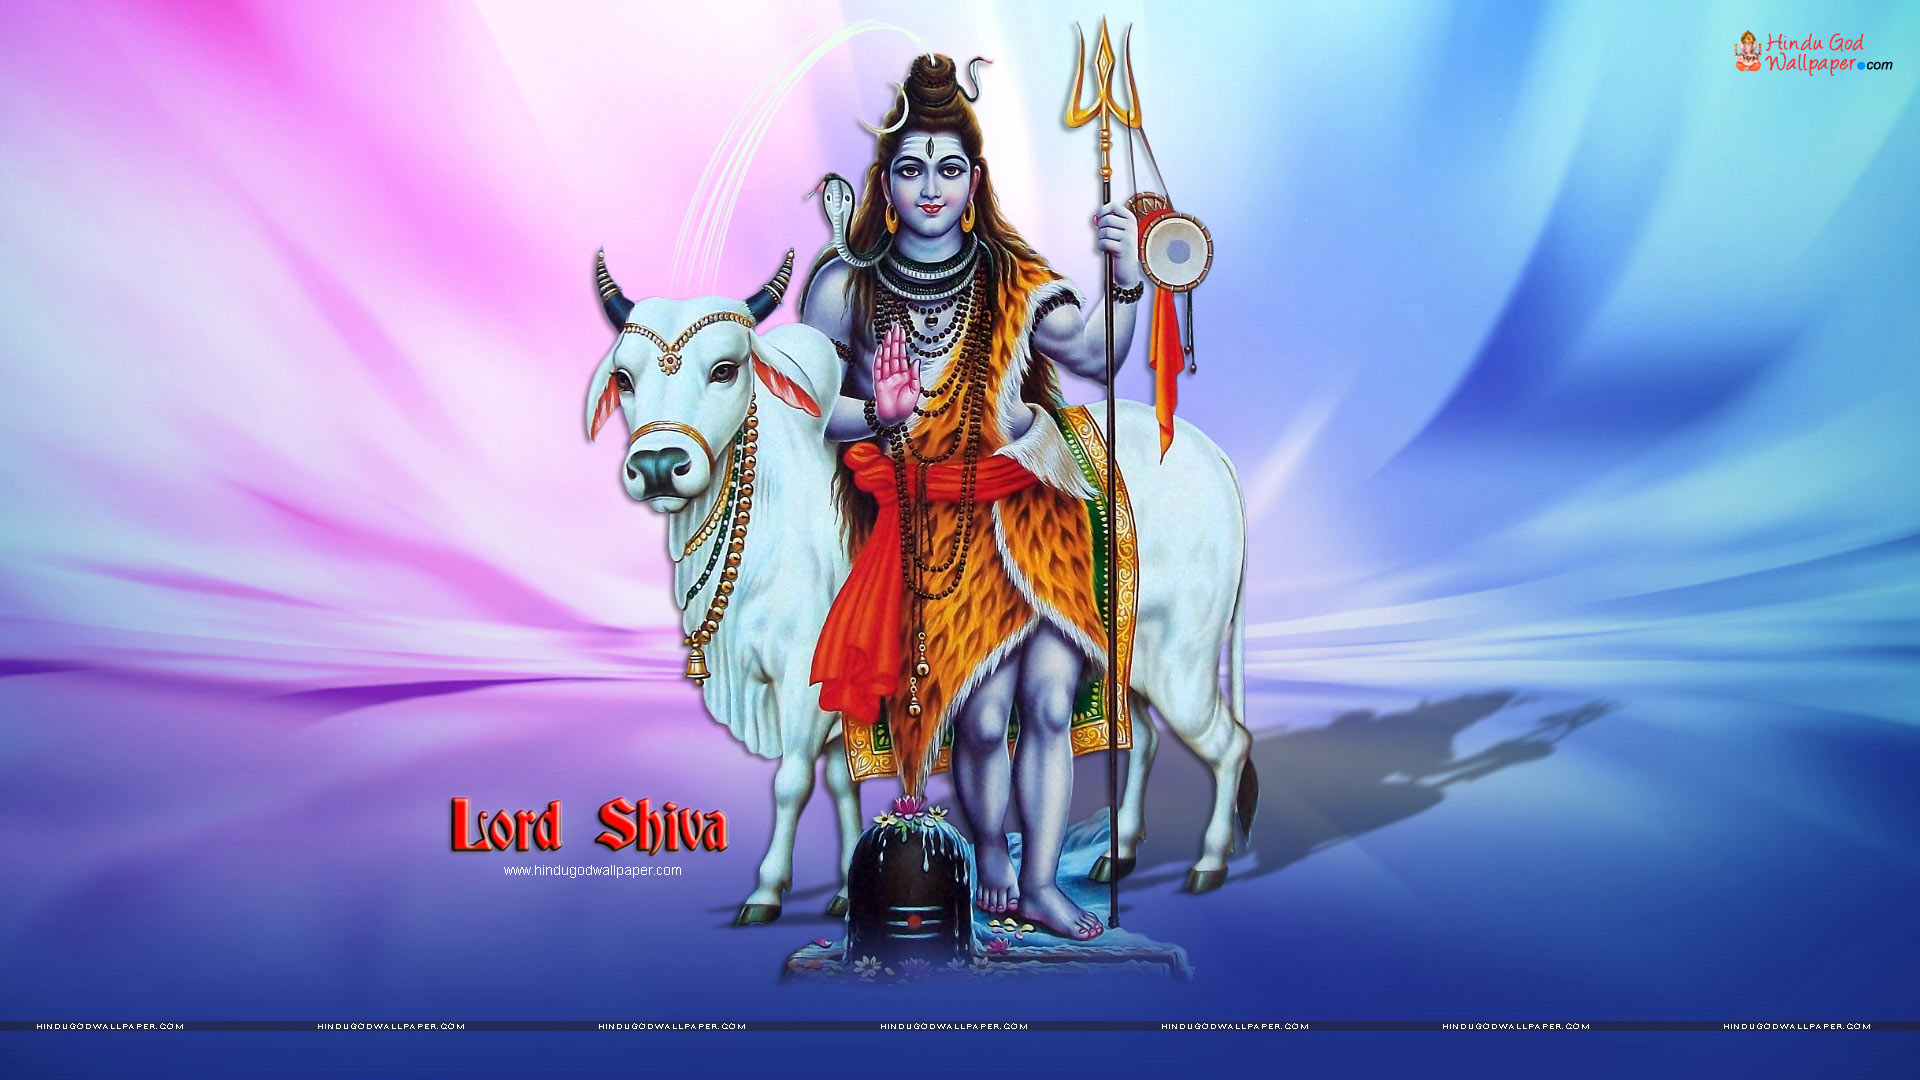 Lord Shiva HD Wallpapers 1920x1080 Full Size Free Download